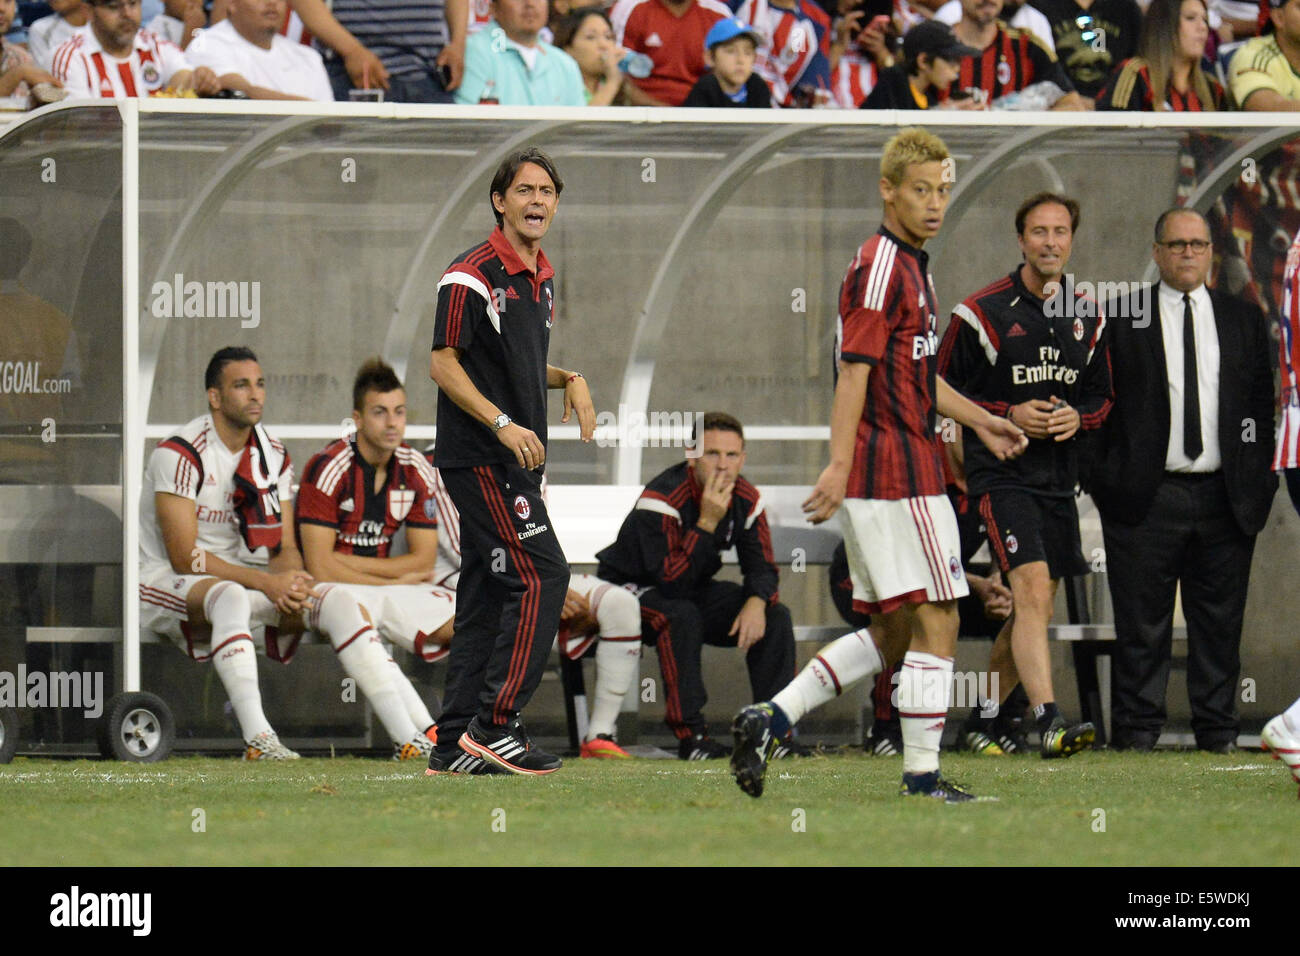 Houston, Texas, USA. 6th Aug, 2014. AC Milan head coach Filippo Inzaghi looks on during a friendly between AC Milan and Chivas de Guadalajara at NRG Stadium in Houston, TX on August 6th, 2014. AC Milan won the game 3-0. Credit:  Trask Smith/ZUMA Wire/Alamy Live News Stock Photo